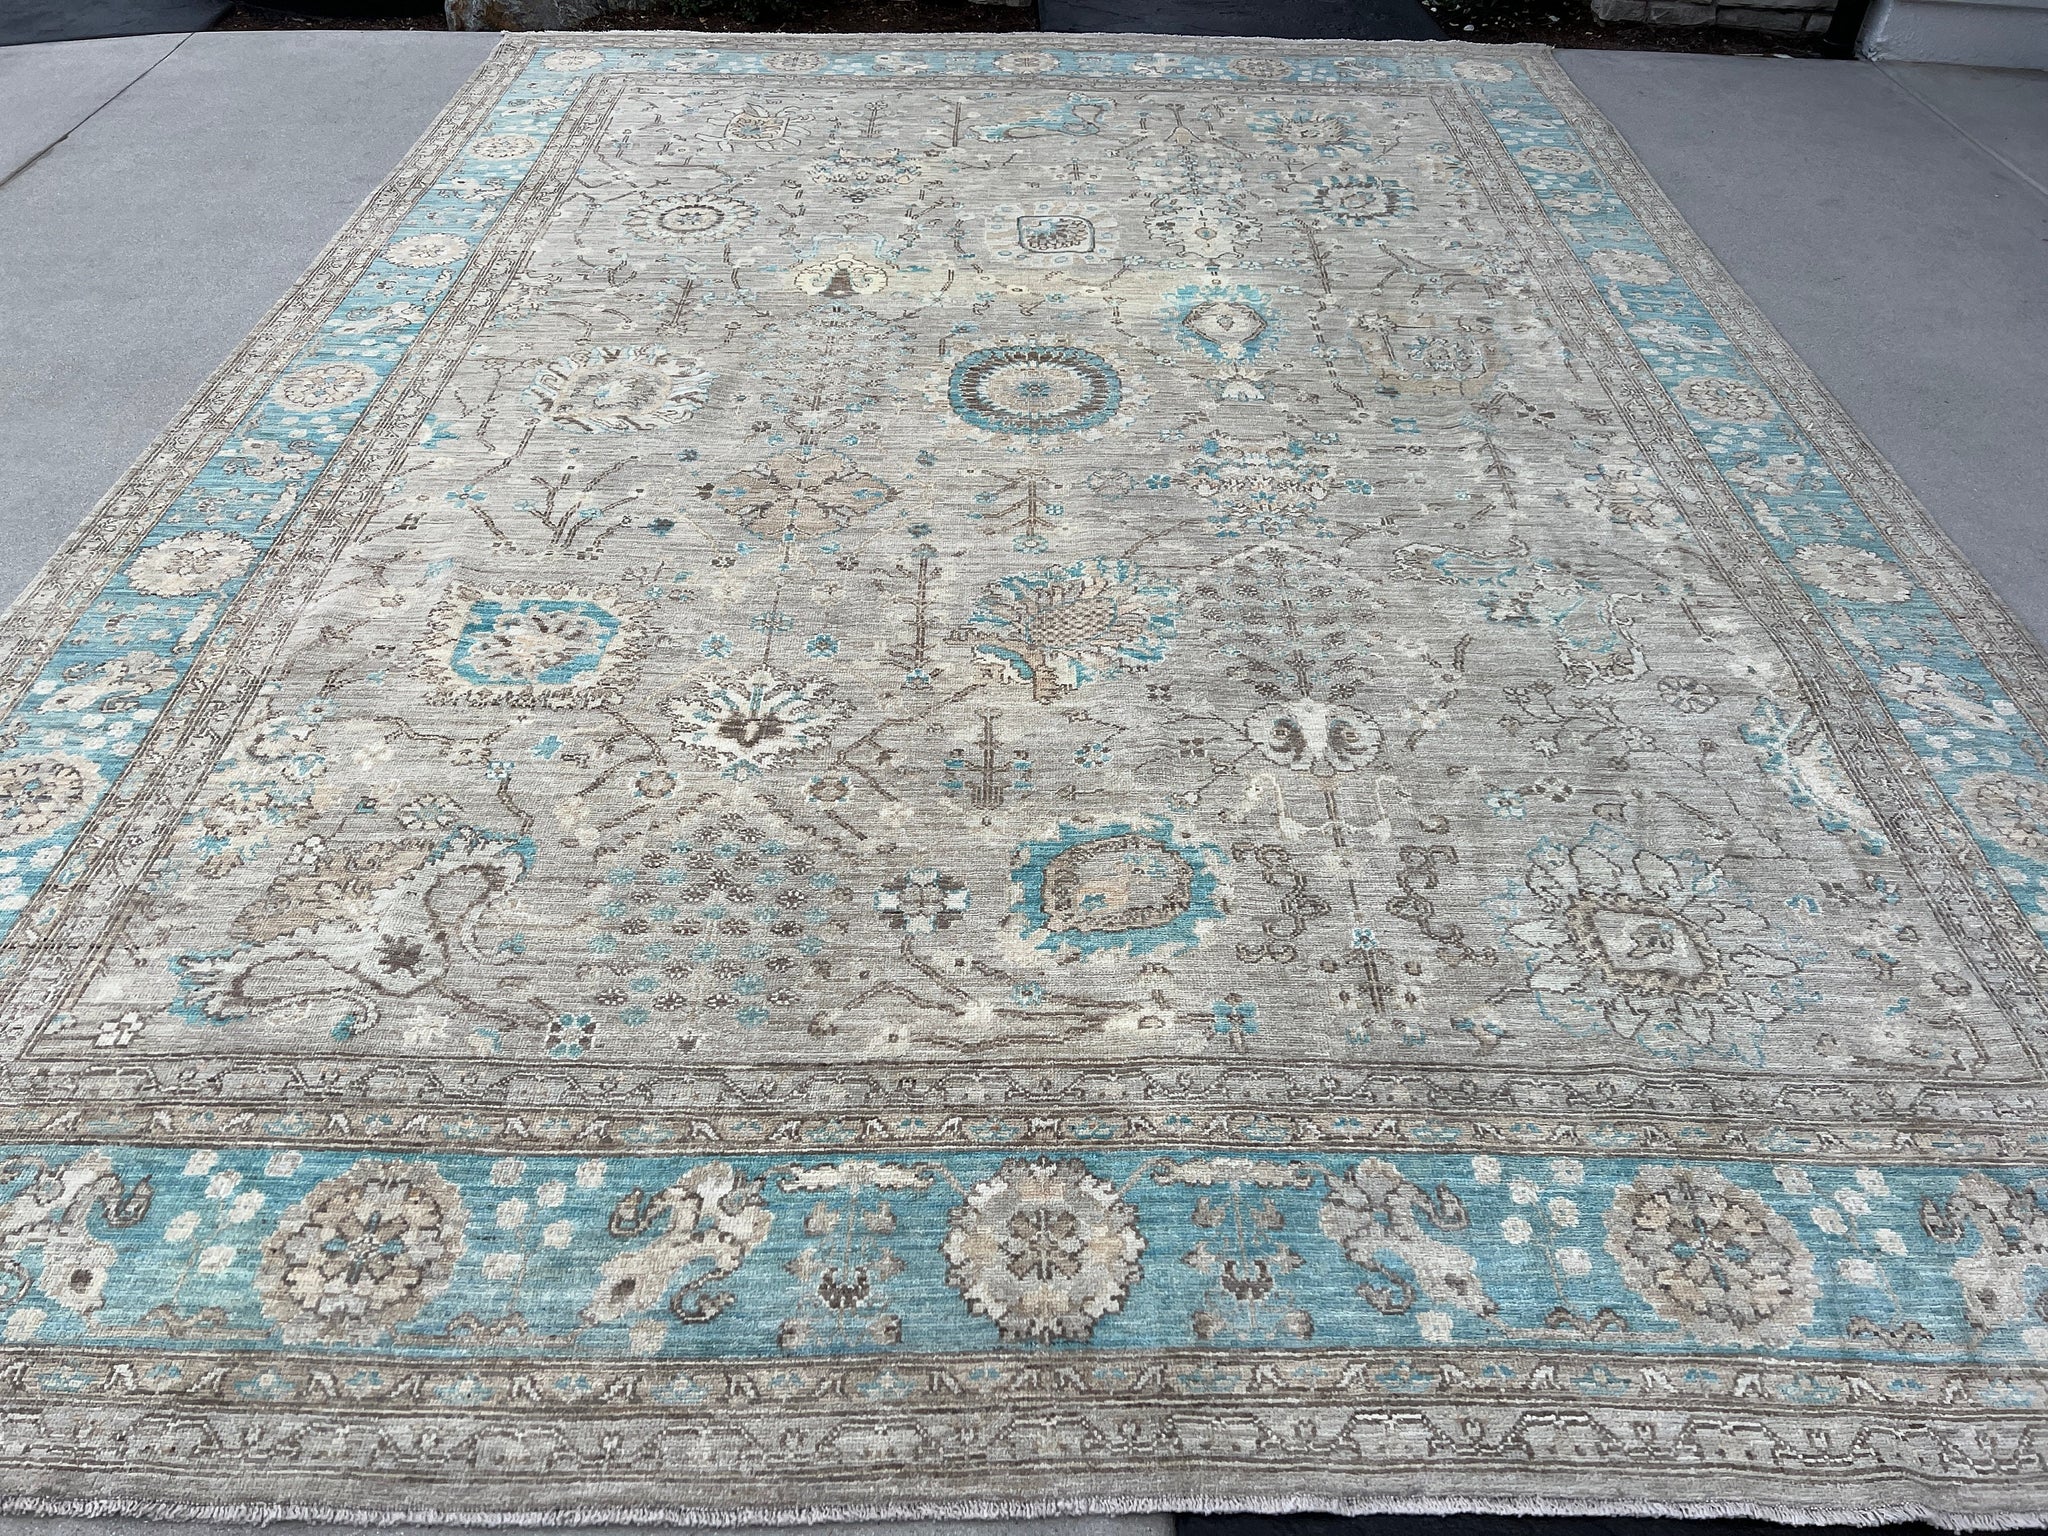 10x13 Fair Trade Handmade Afghan Rug | Muted Neutral Pastel Light Warm Grey Charcoal Teal Tan Brown Turquoise | Knotted Oushak Persian